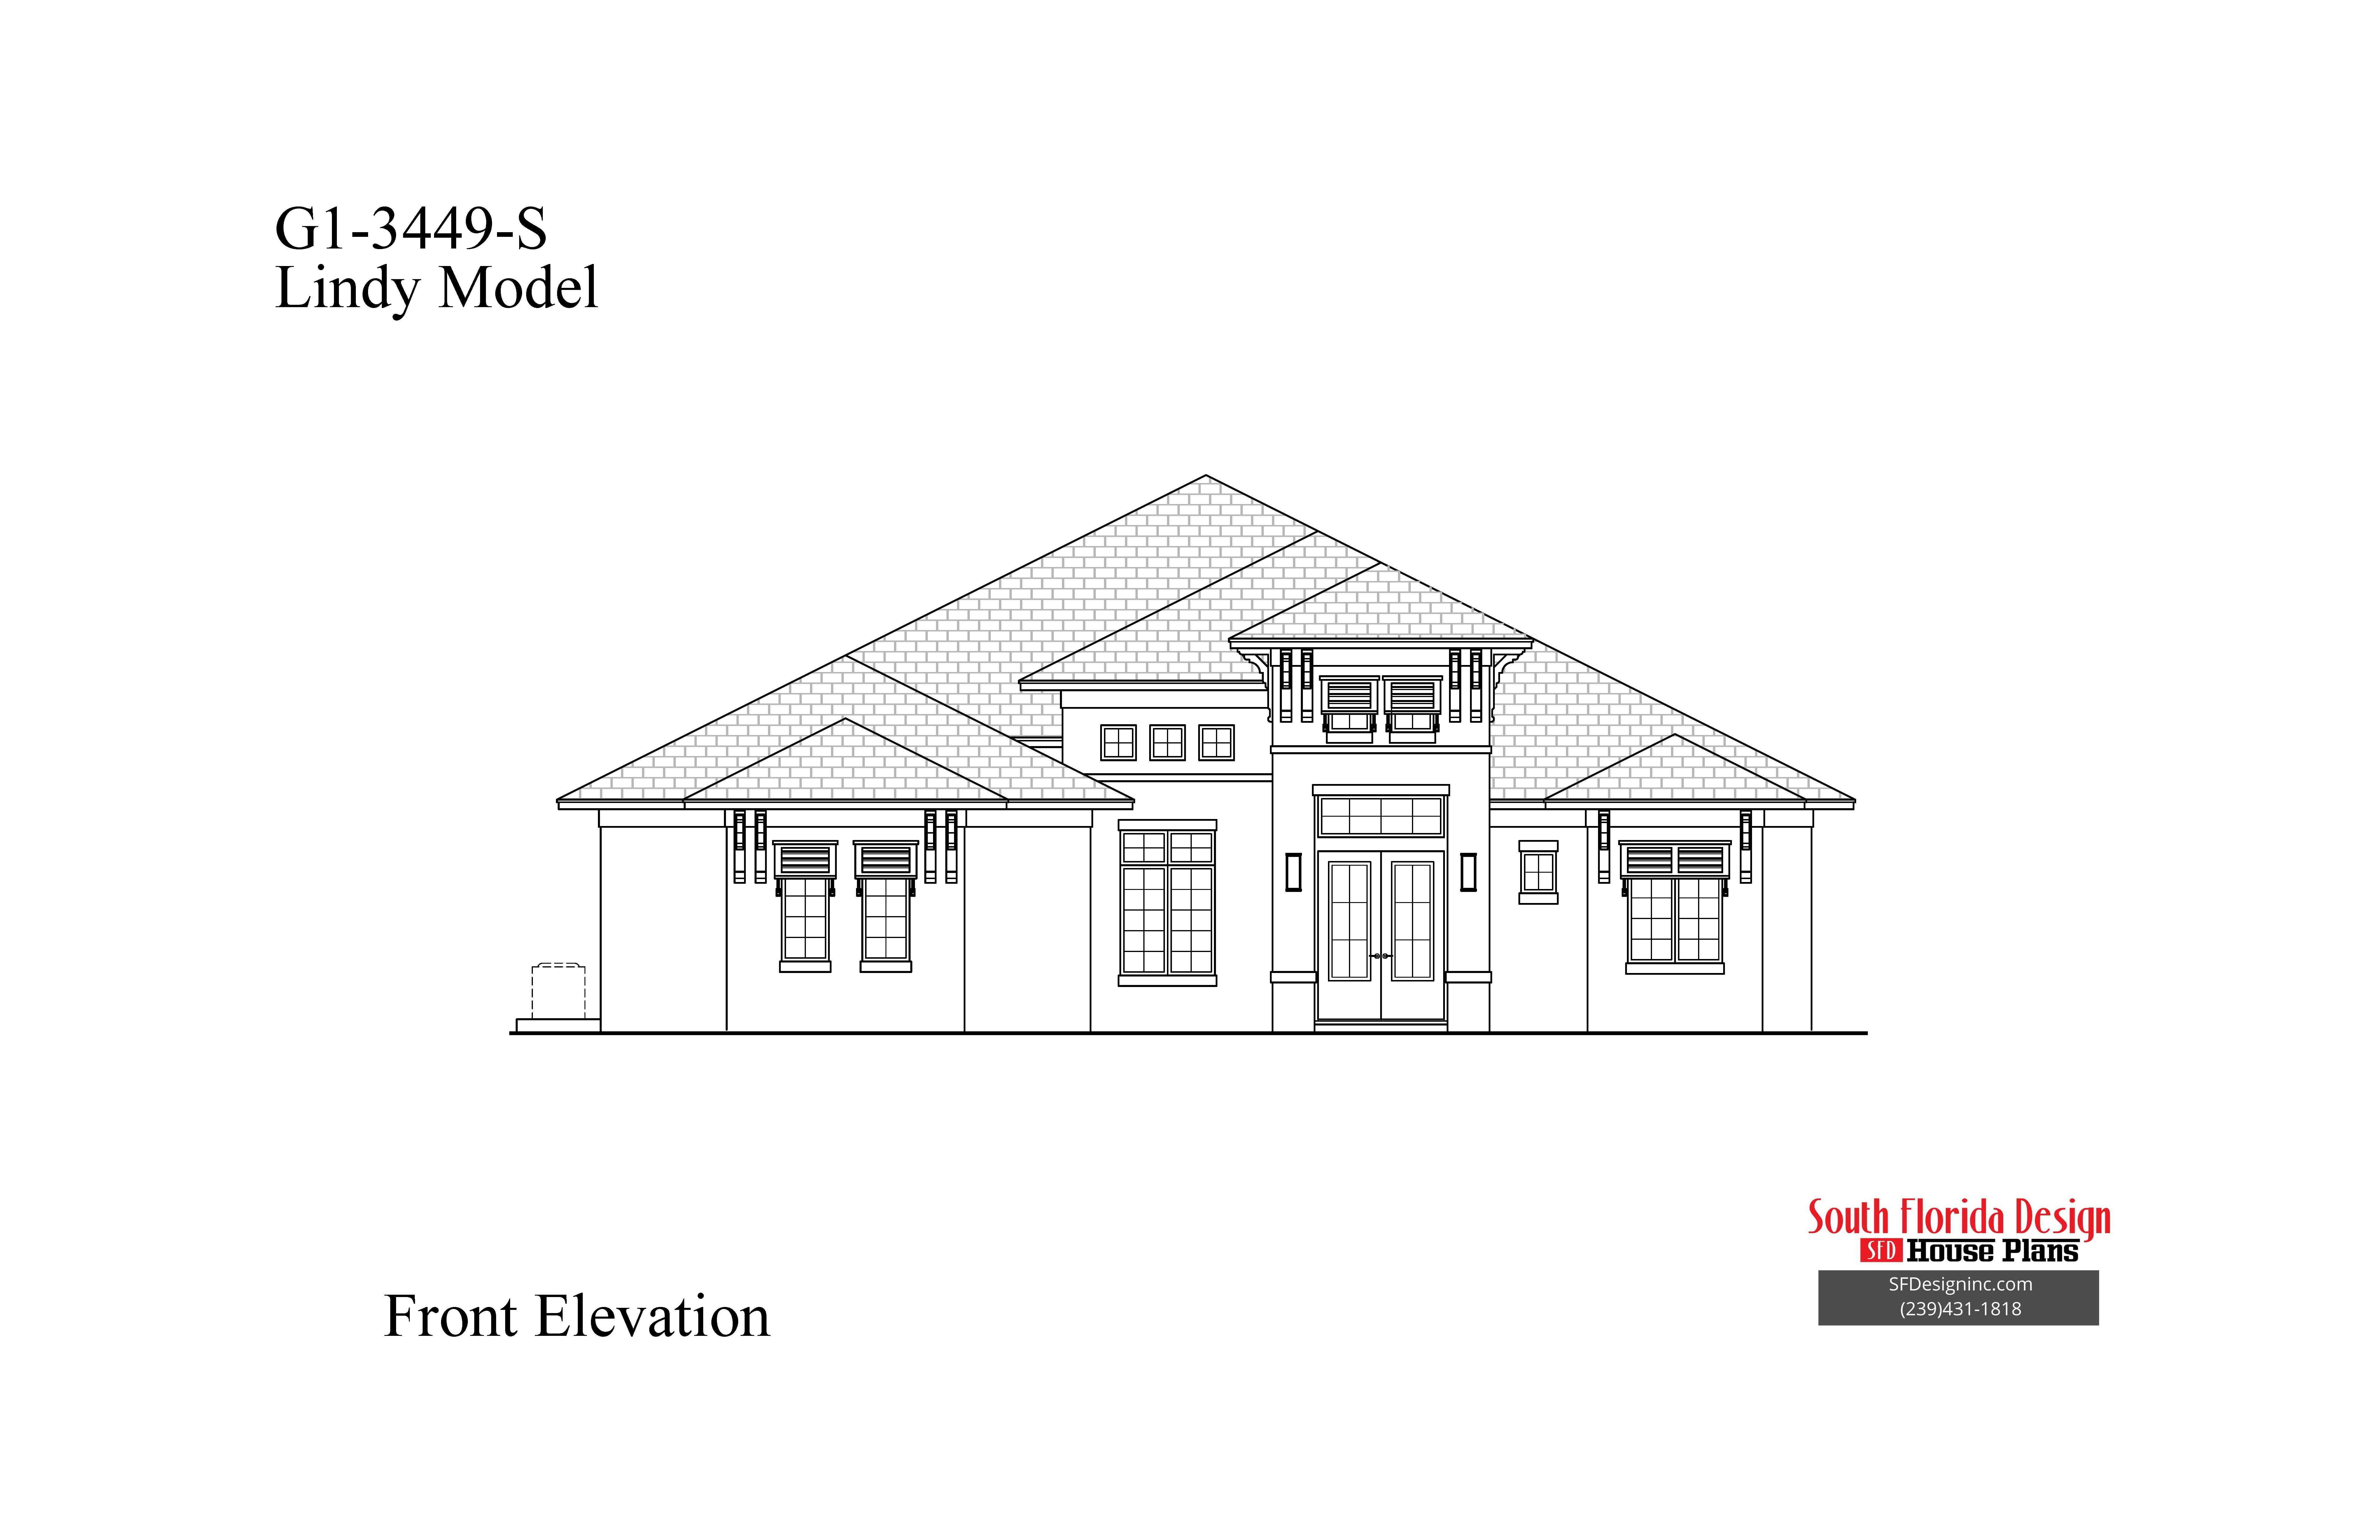 Black and white front elevation image of a 1-story 3449sf house plan